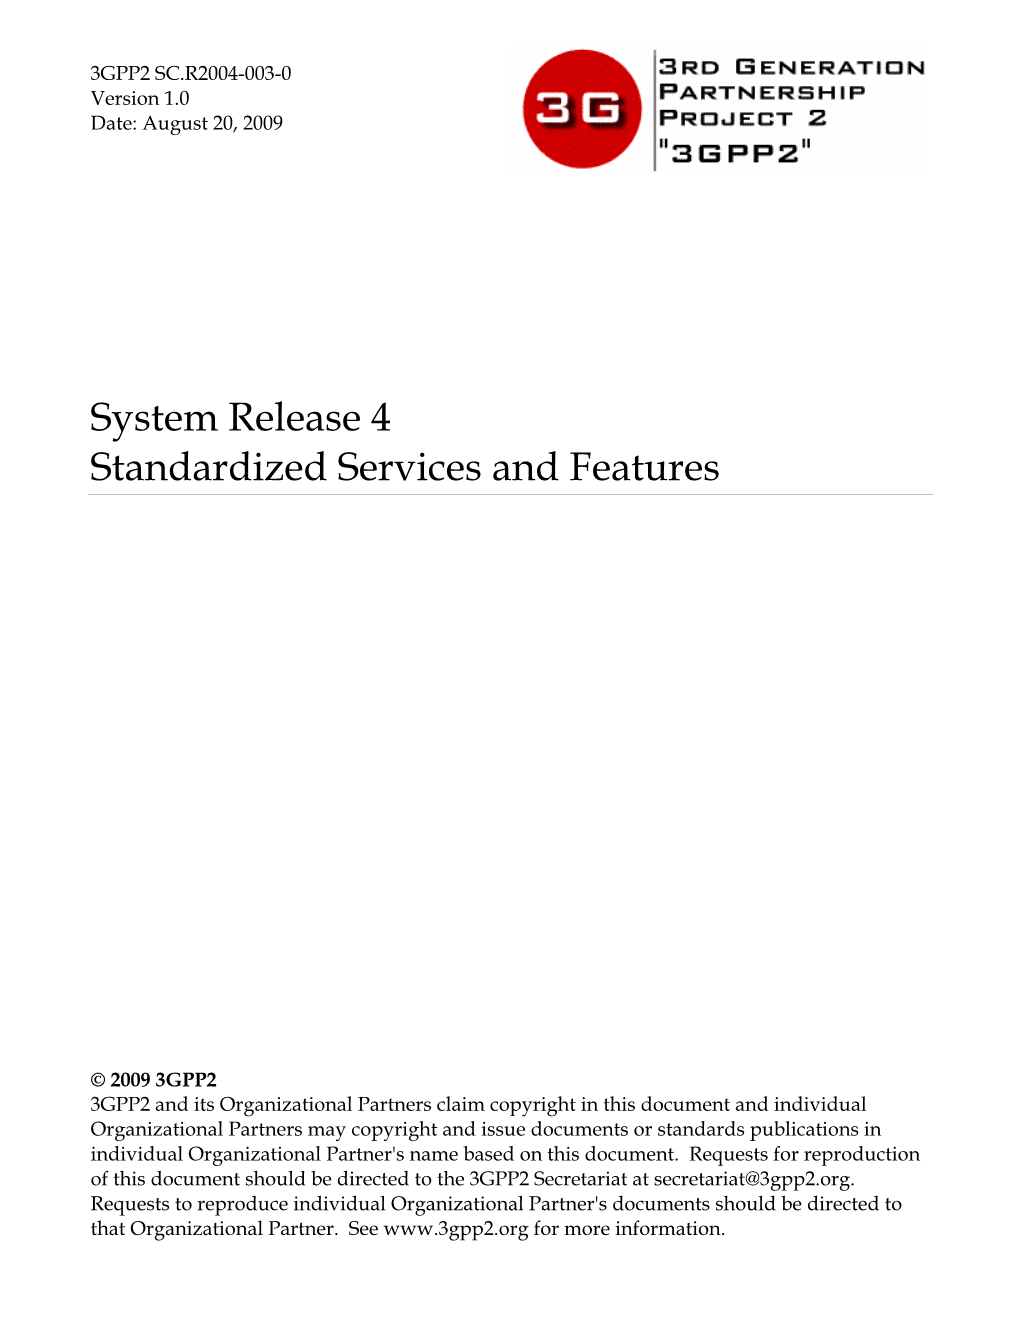 System Release 4 Standardized Services and Features